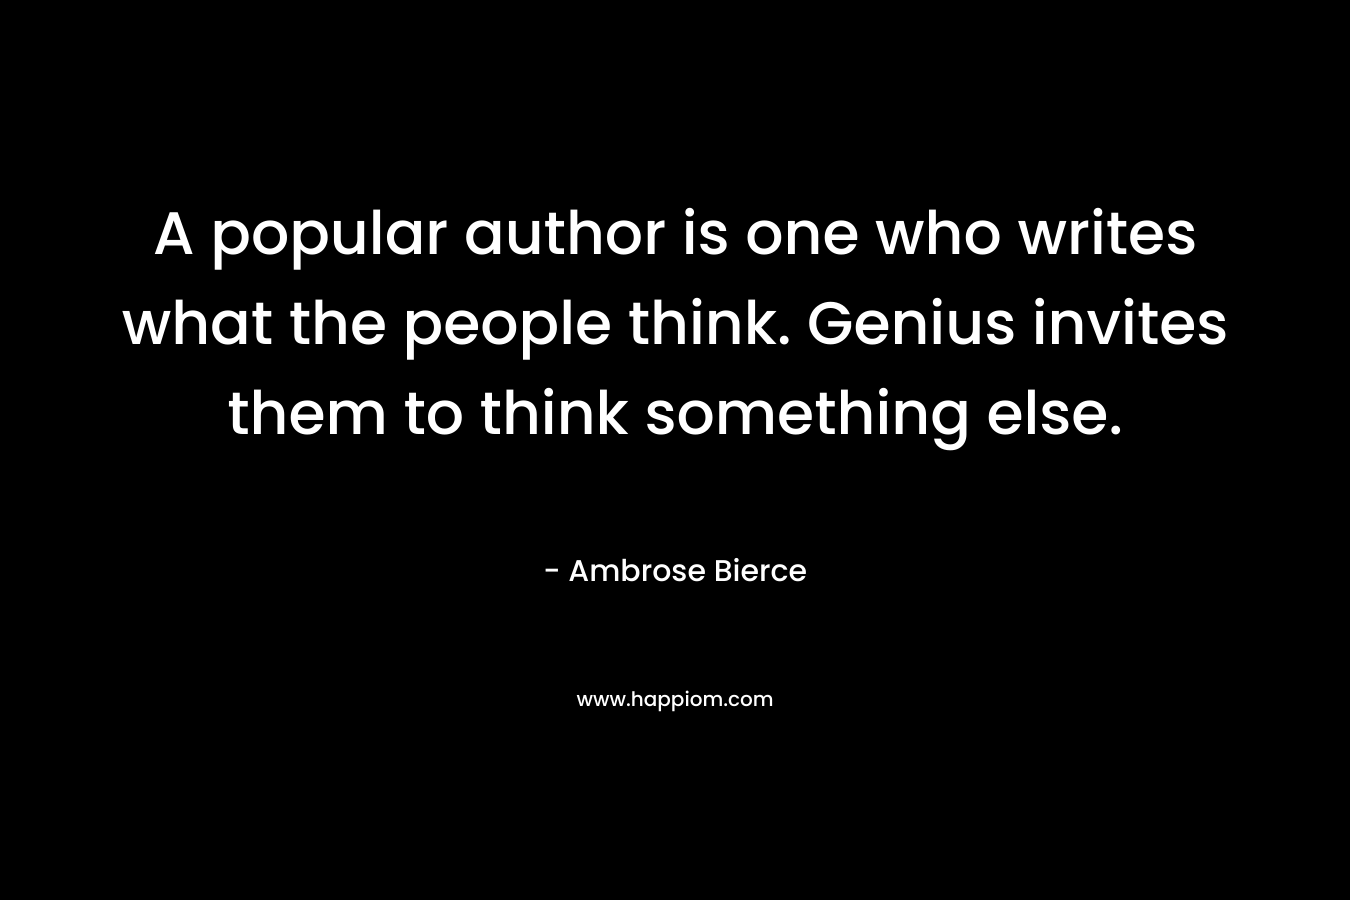 A popular author is one who writes what the people think. Genius invites them to think something else. – Ambrose Bierce